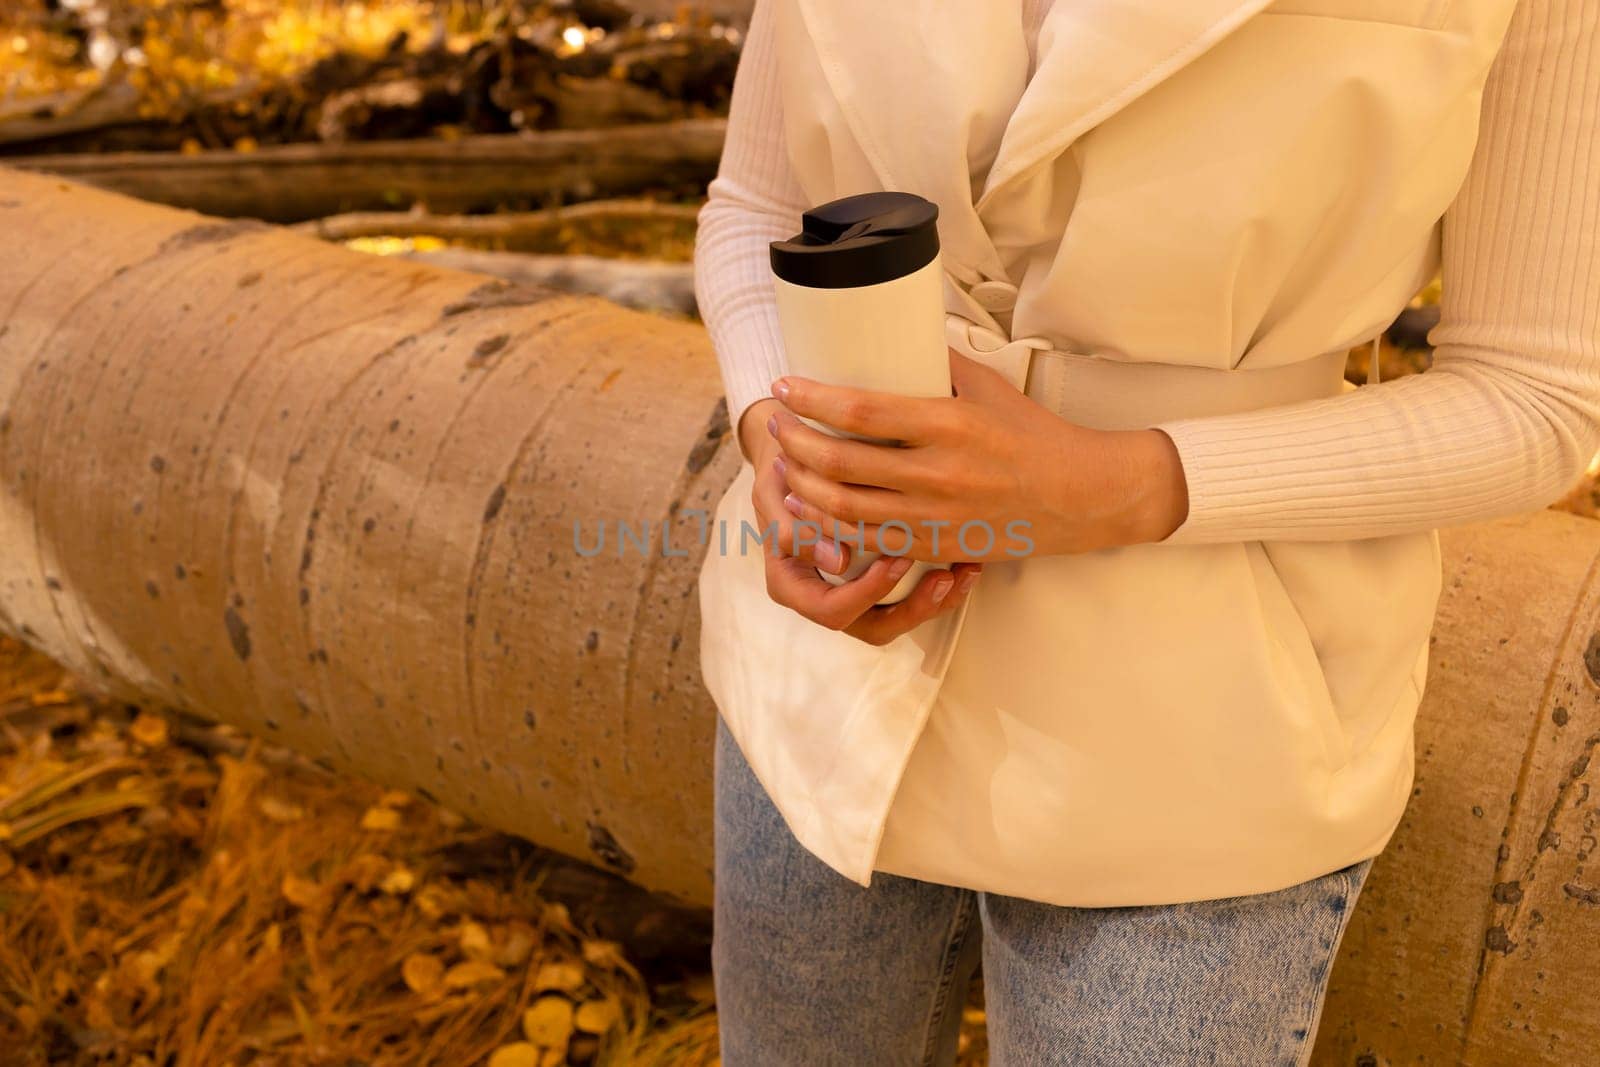 Caucasian Female Drinks Autumn Beverage From Thermos, Travel Mug Outside In Park Or Forest, Wears Warm Beige Vest. Hot Tea Or Coffee, Fall Leaves Season. Horizontal Plane Yellow background. Copyspace by netatsi